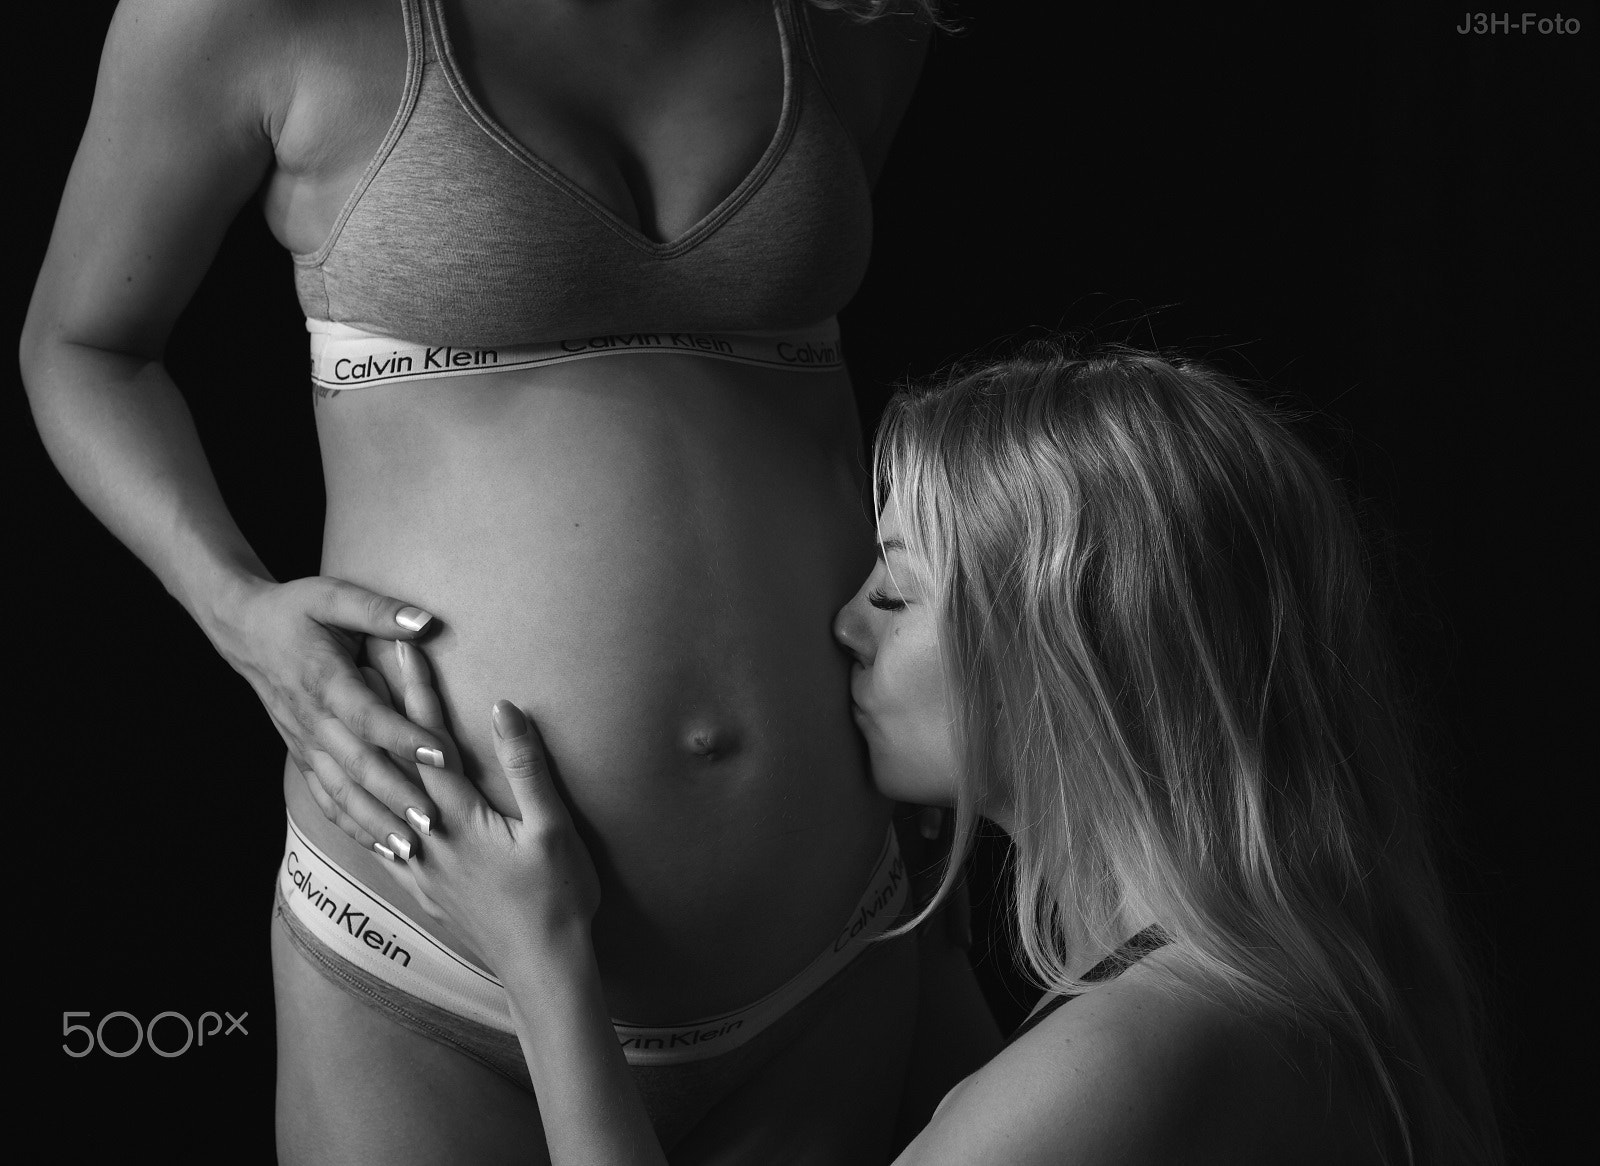 Nikon D750 + AF Micro-Nikkor 55mm f/2.8 sample photo. S.h. pregnant w. girlfriend i - b/w photography